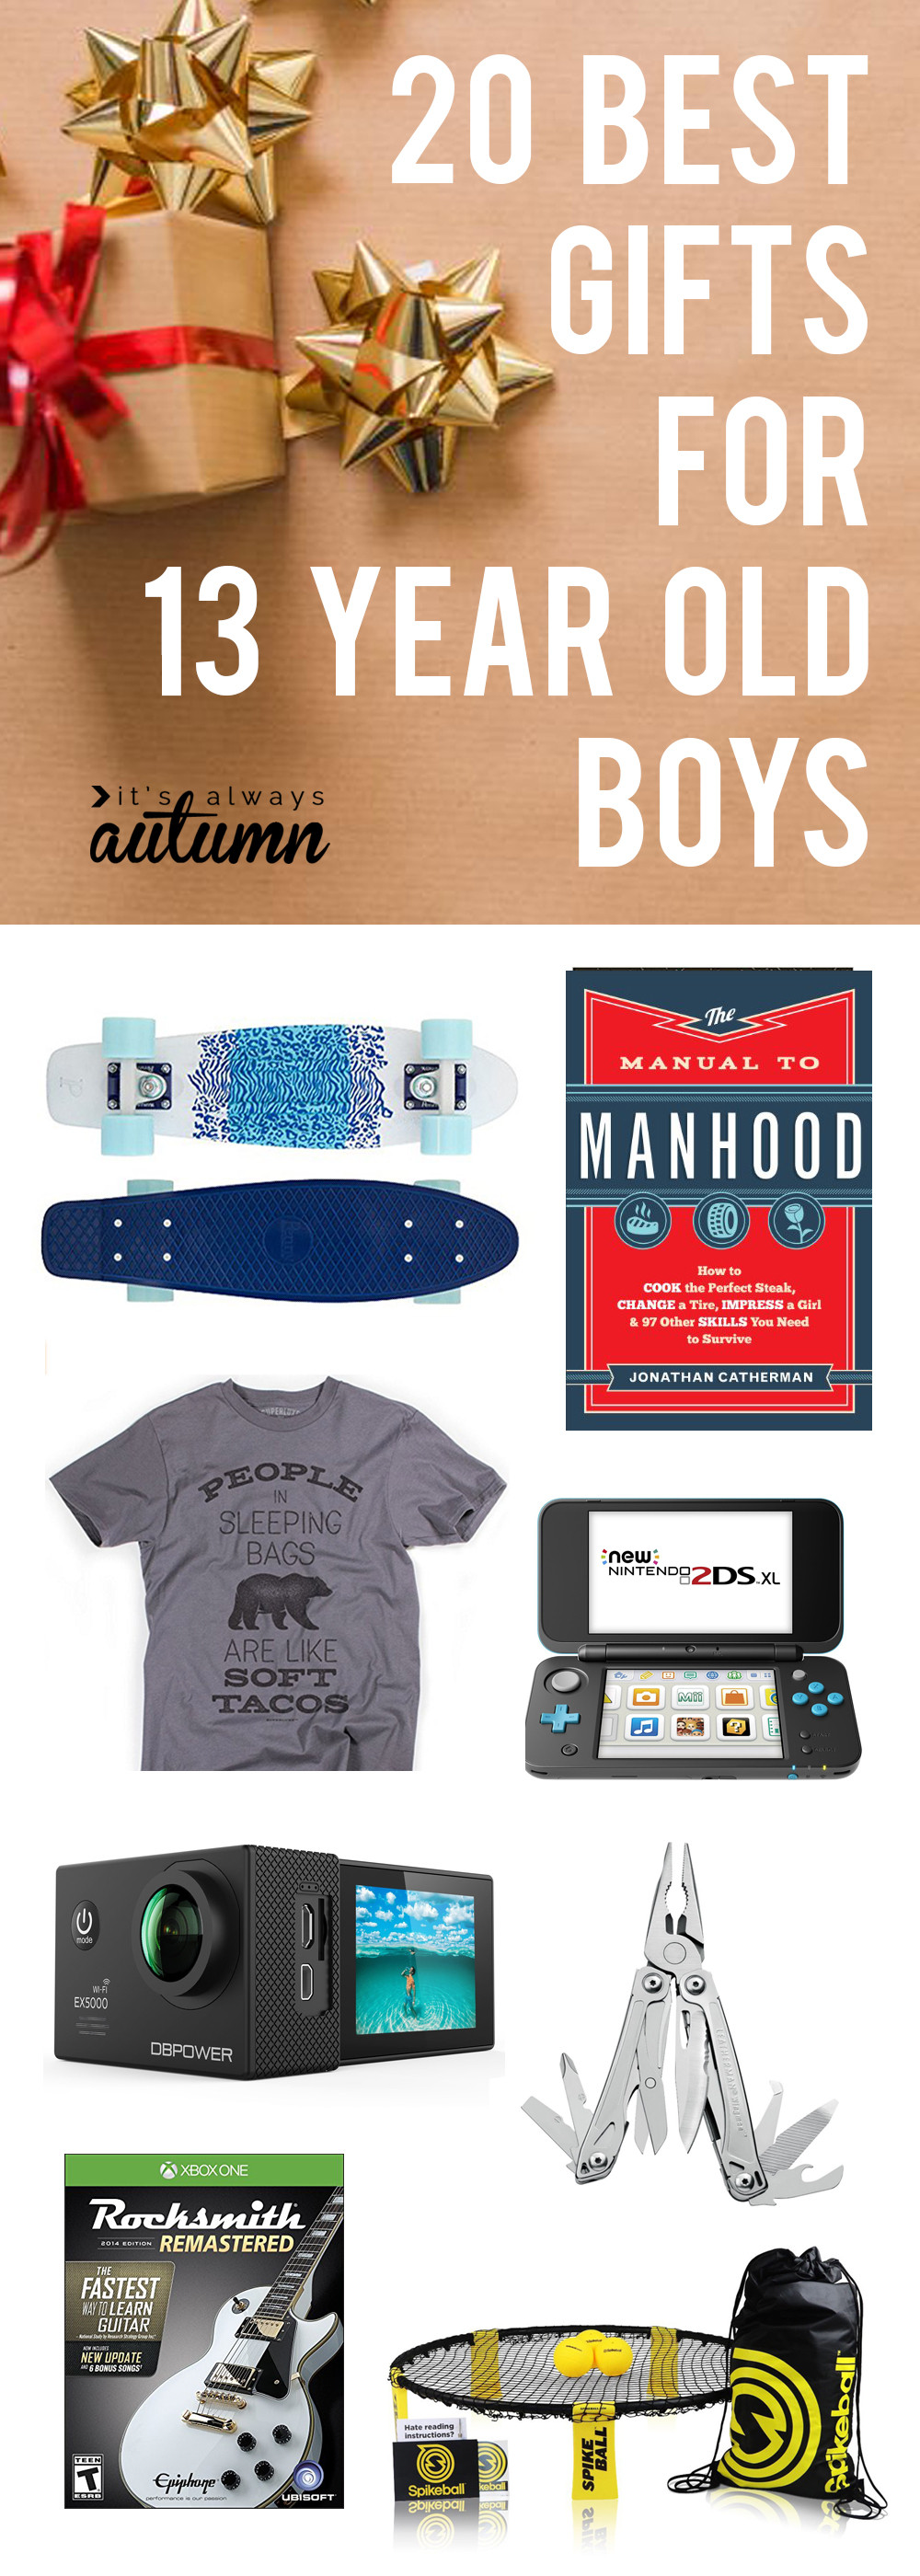 Good Gift Ideas For Boys
 best Christmas ts for 13 year old boys It s Always Autumn